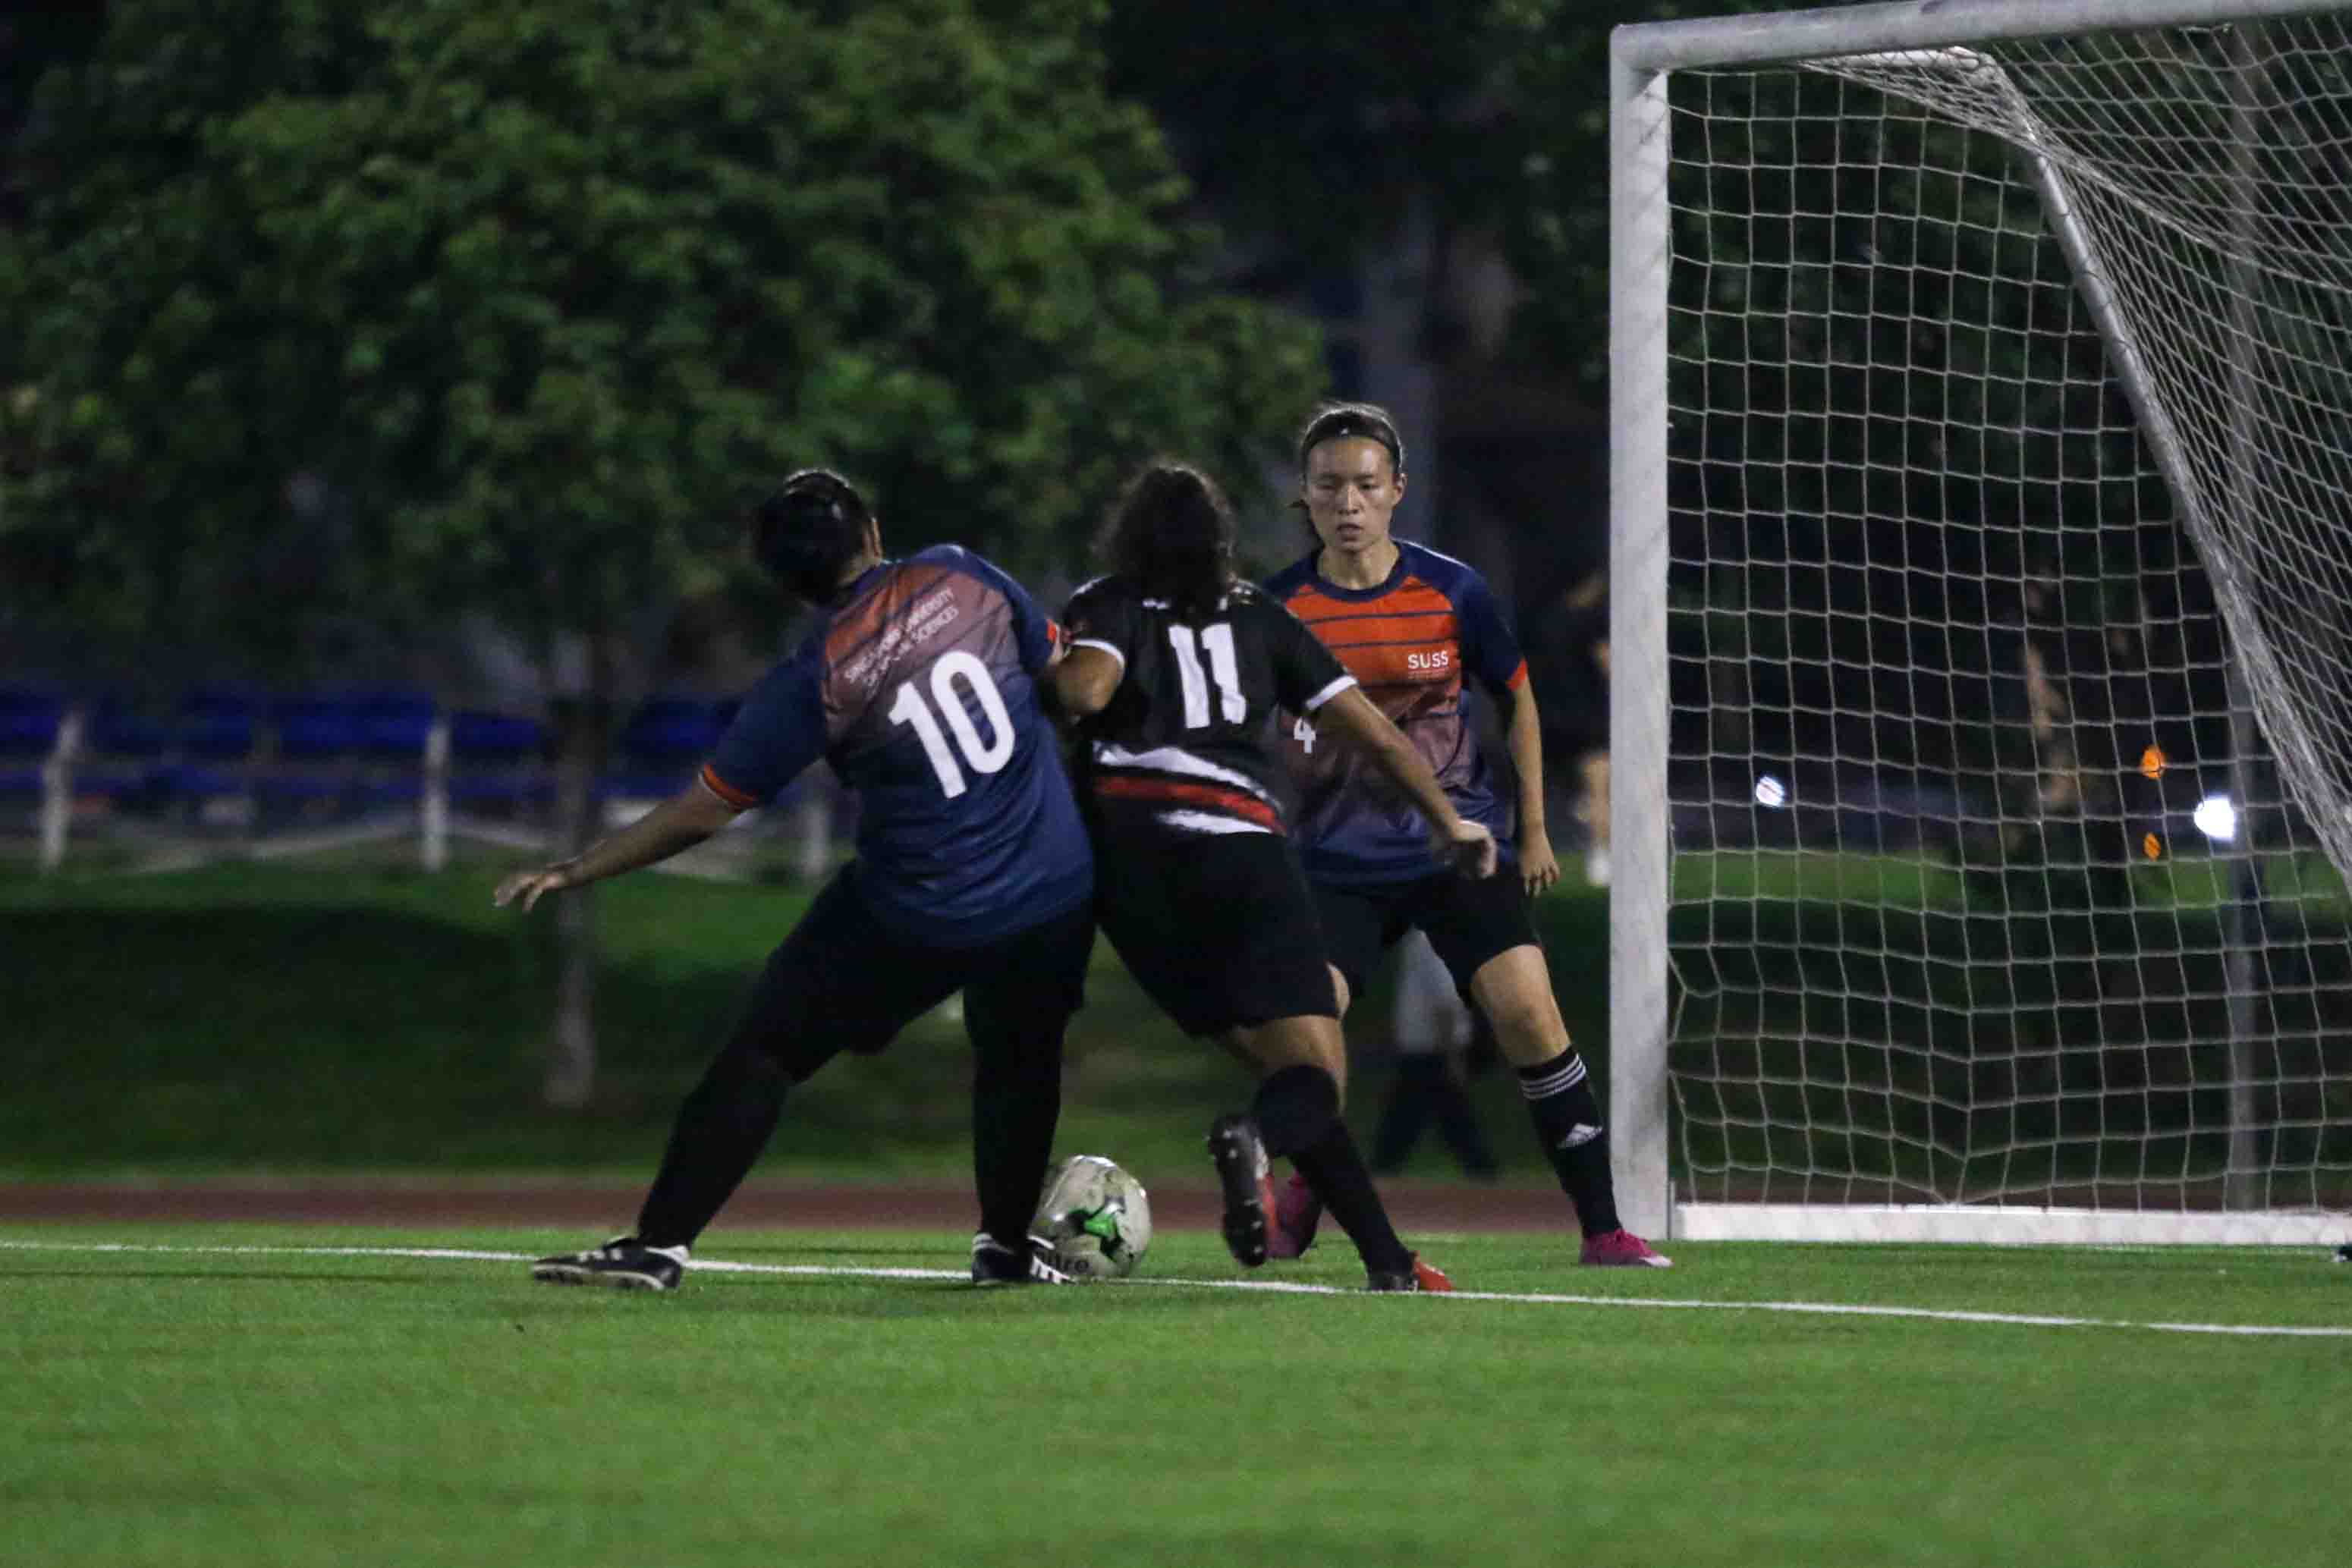 Nur Hafizah (SUSS #10) and Deanna Lim (SUSS #4) tries to prevent Vinita Sheri (SIT #11) from getting the ball in their penalty box. (Photo 6 © Clara Lau/Red Sports)